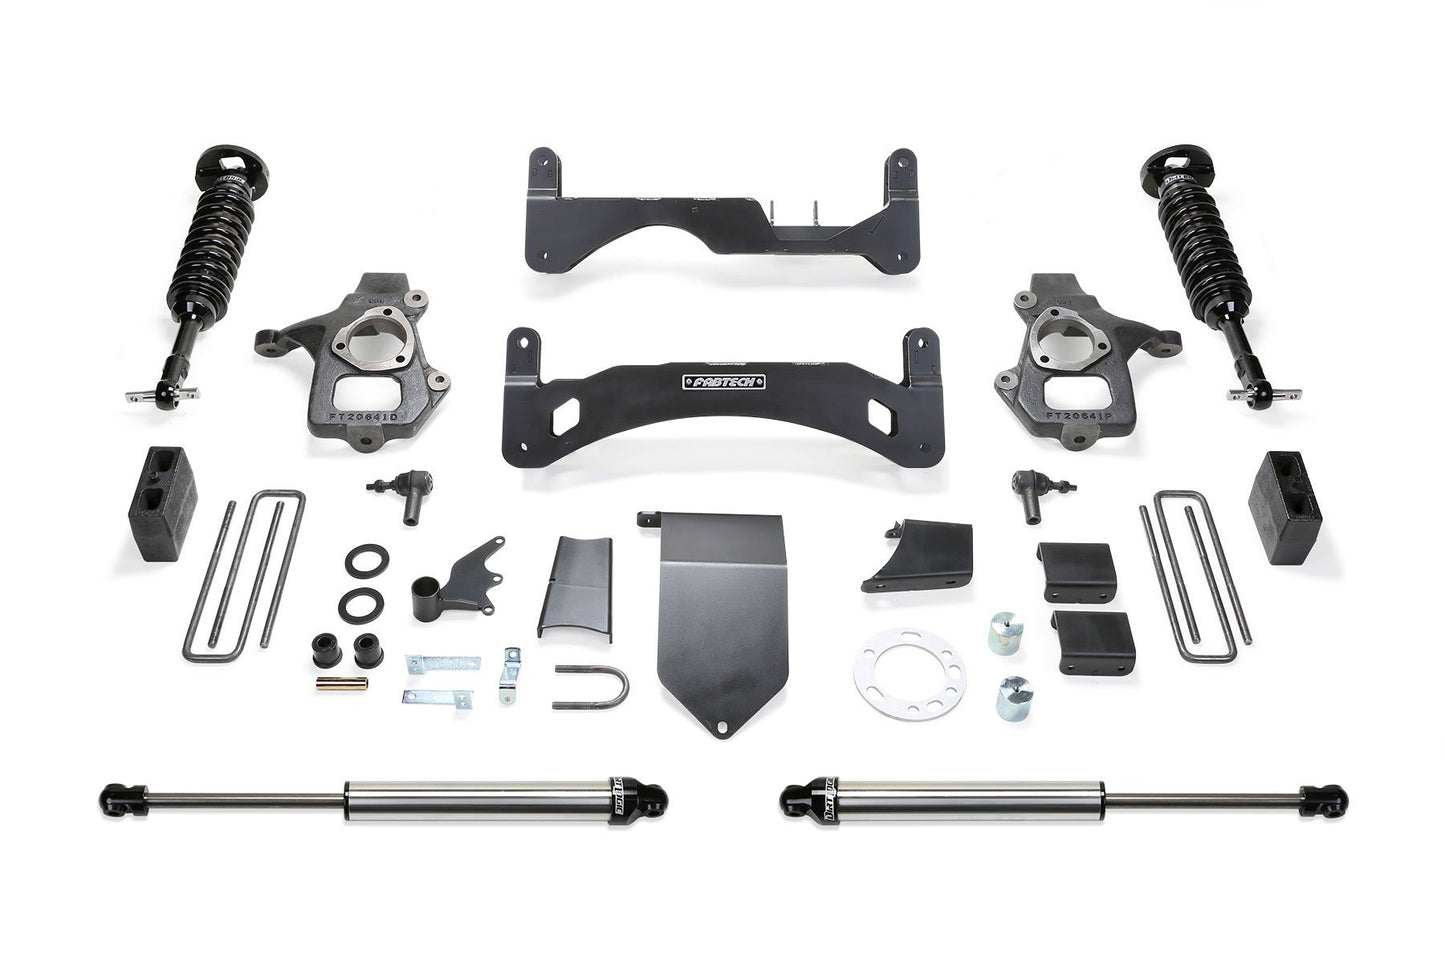 6" PERF SYS G2 W/DL 2.5 & 2.25 14-18 GM C/K1500 P/U W/ OE FORG STL UCA - 6" PERF SYS G2 W/DL - Fabtech - Texas Complete Truck Center